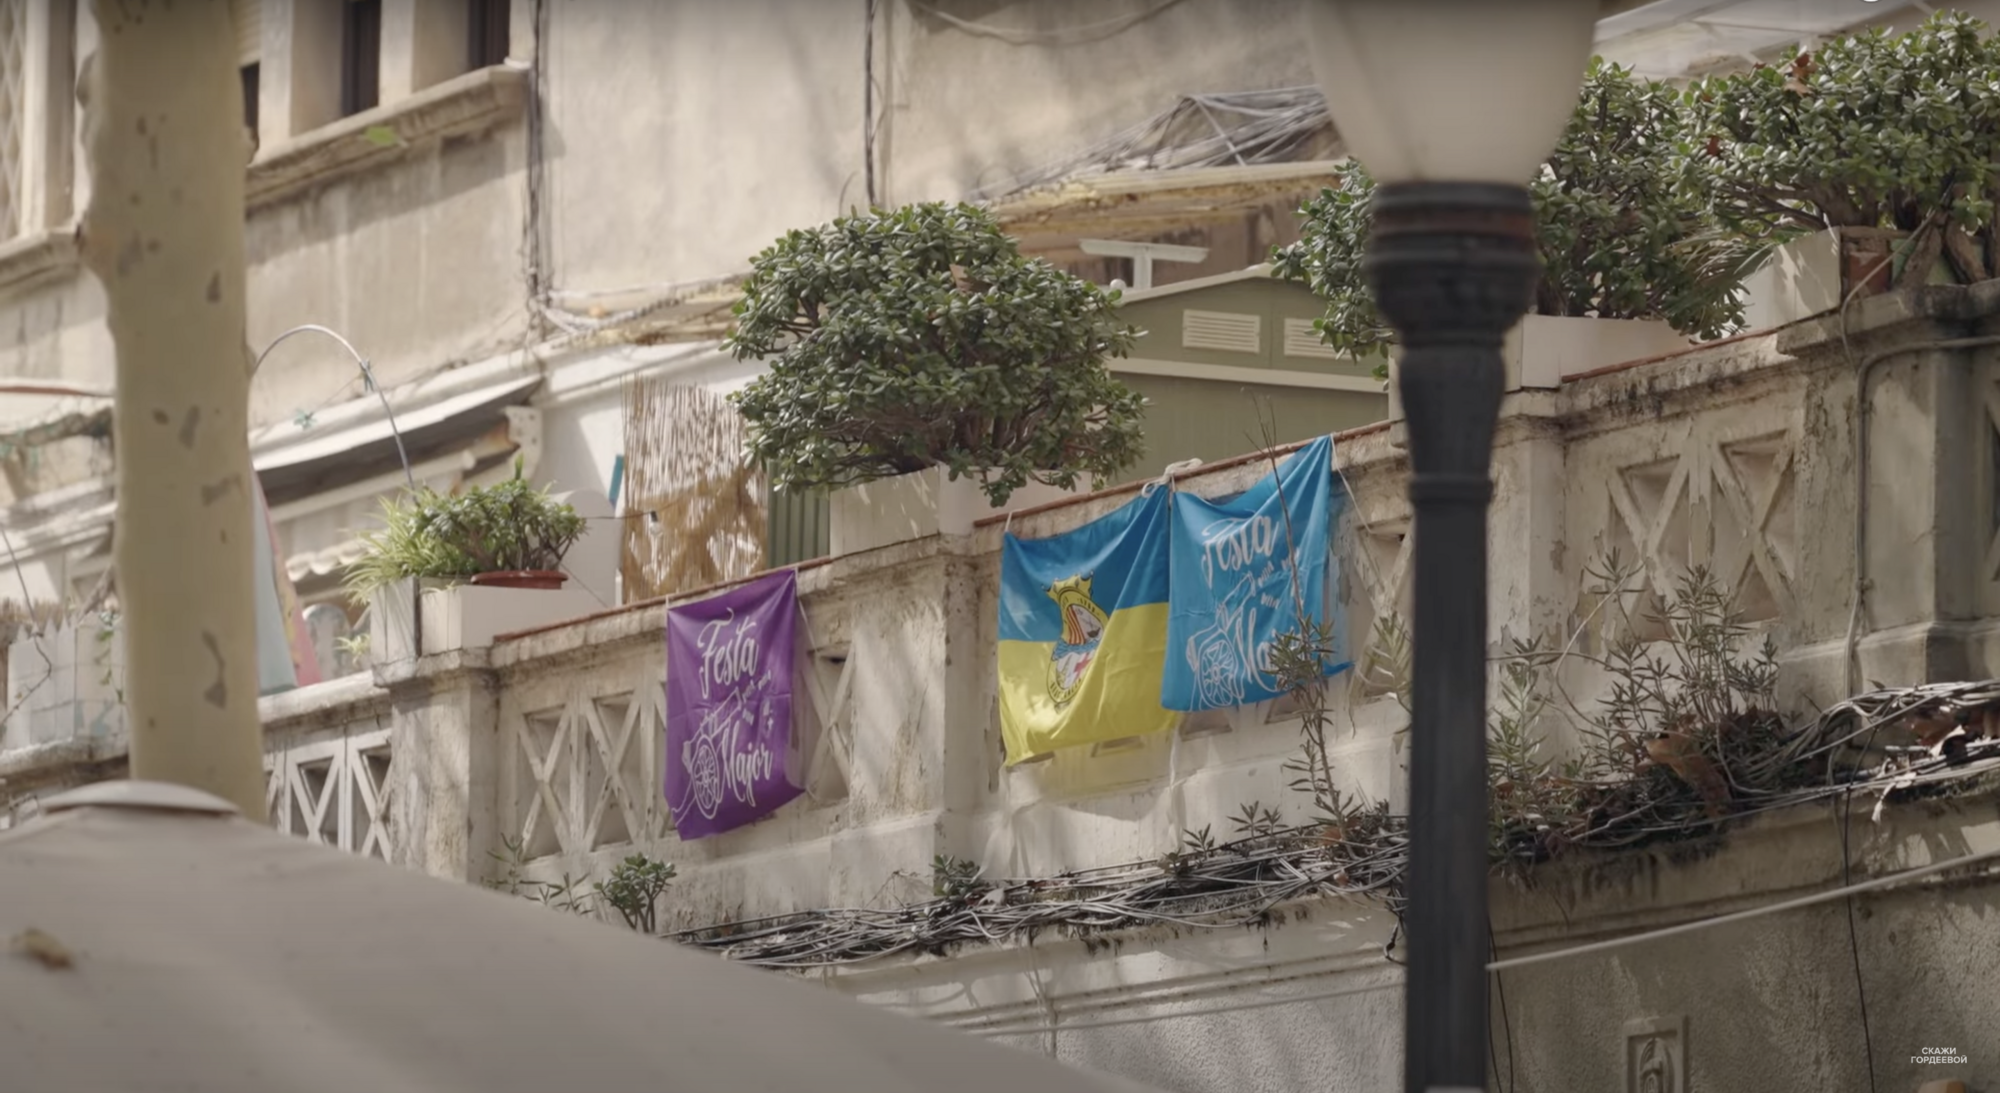 It has nothing to do with Ukraine: why many Barcelona residents hang blue and yellow flags on their balconies